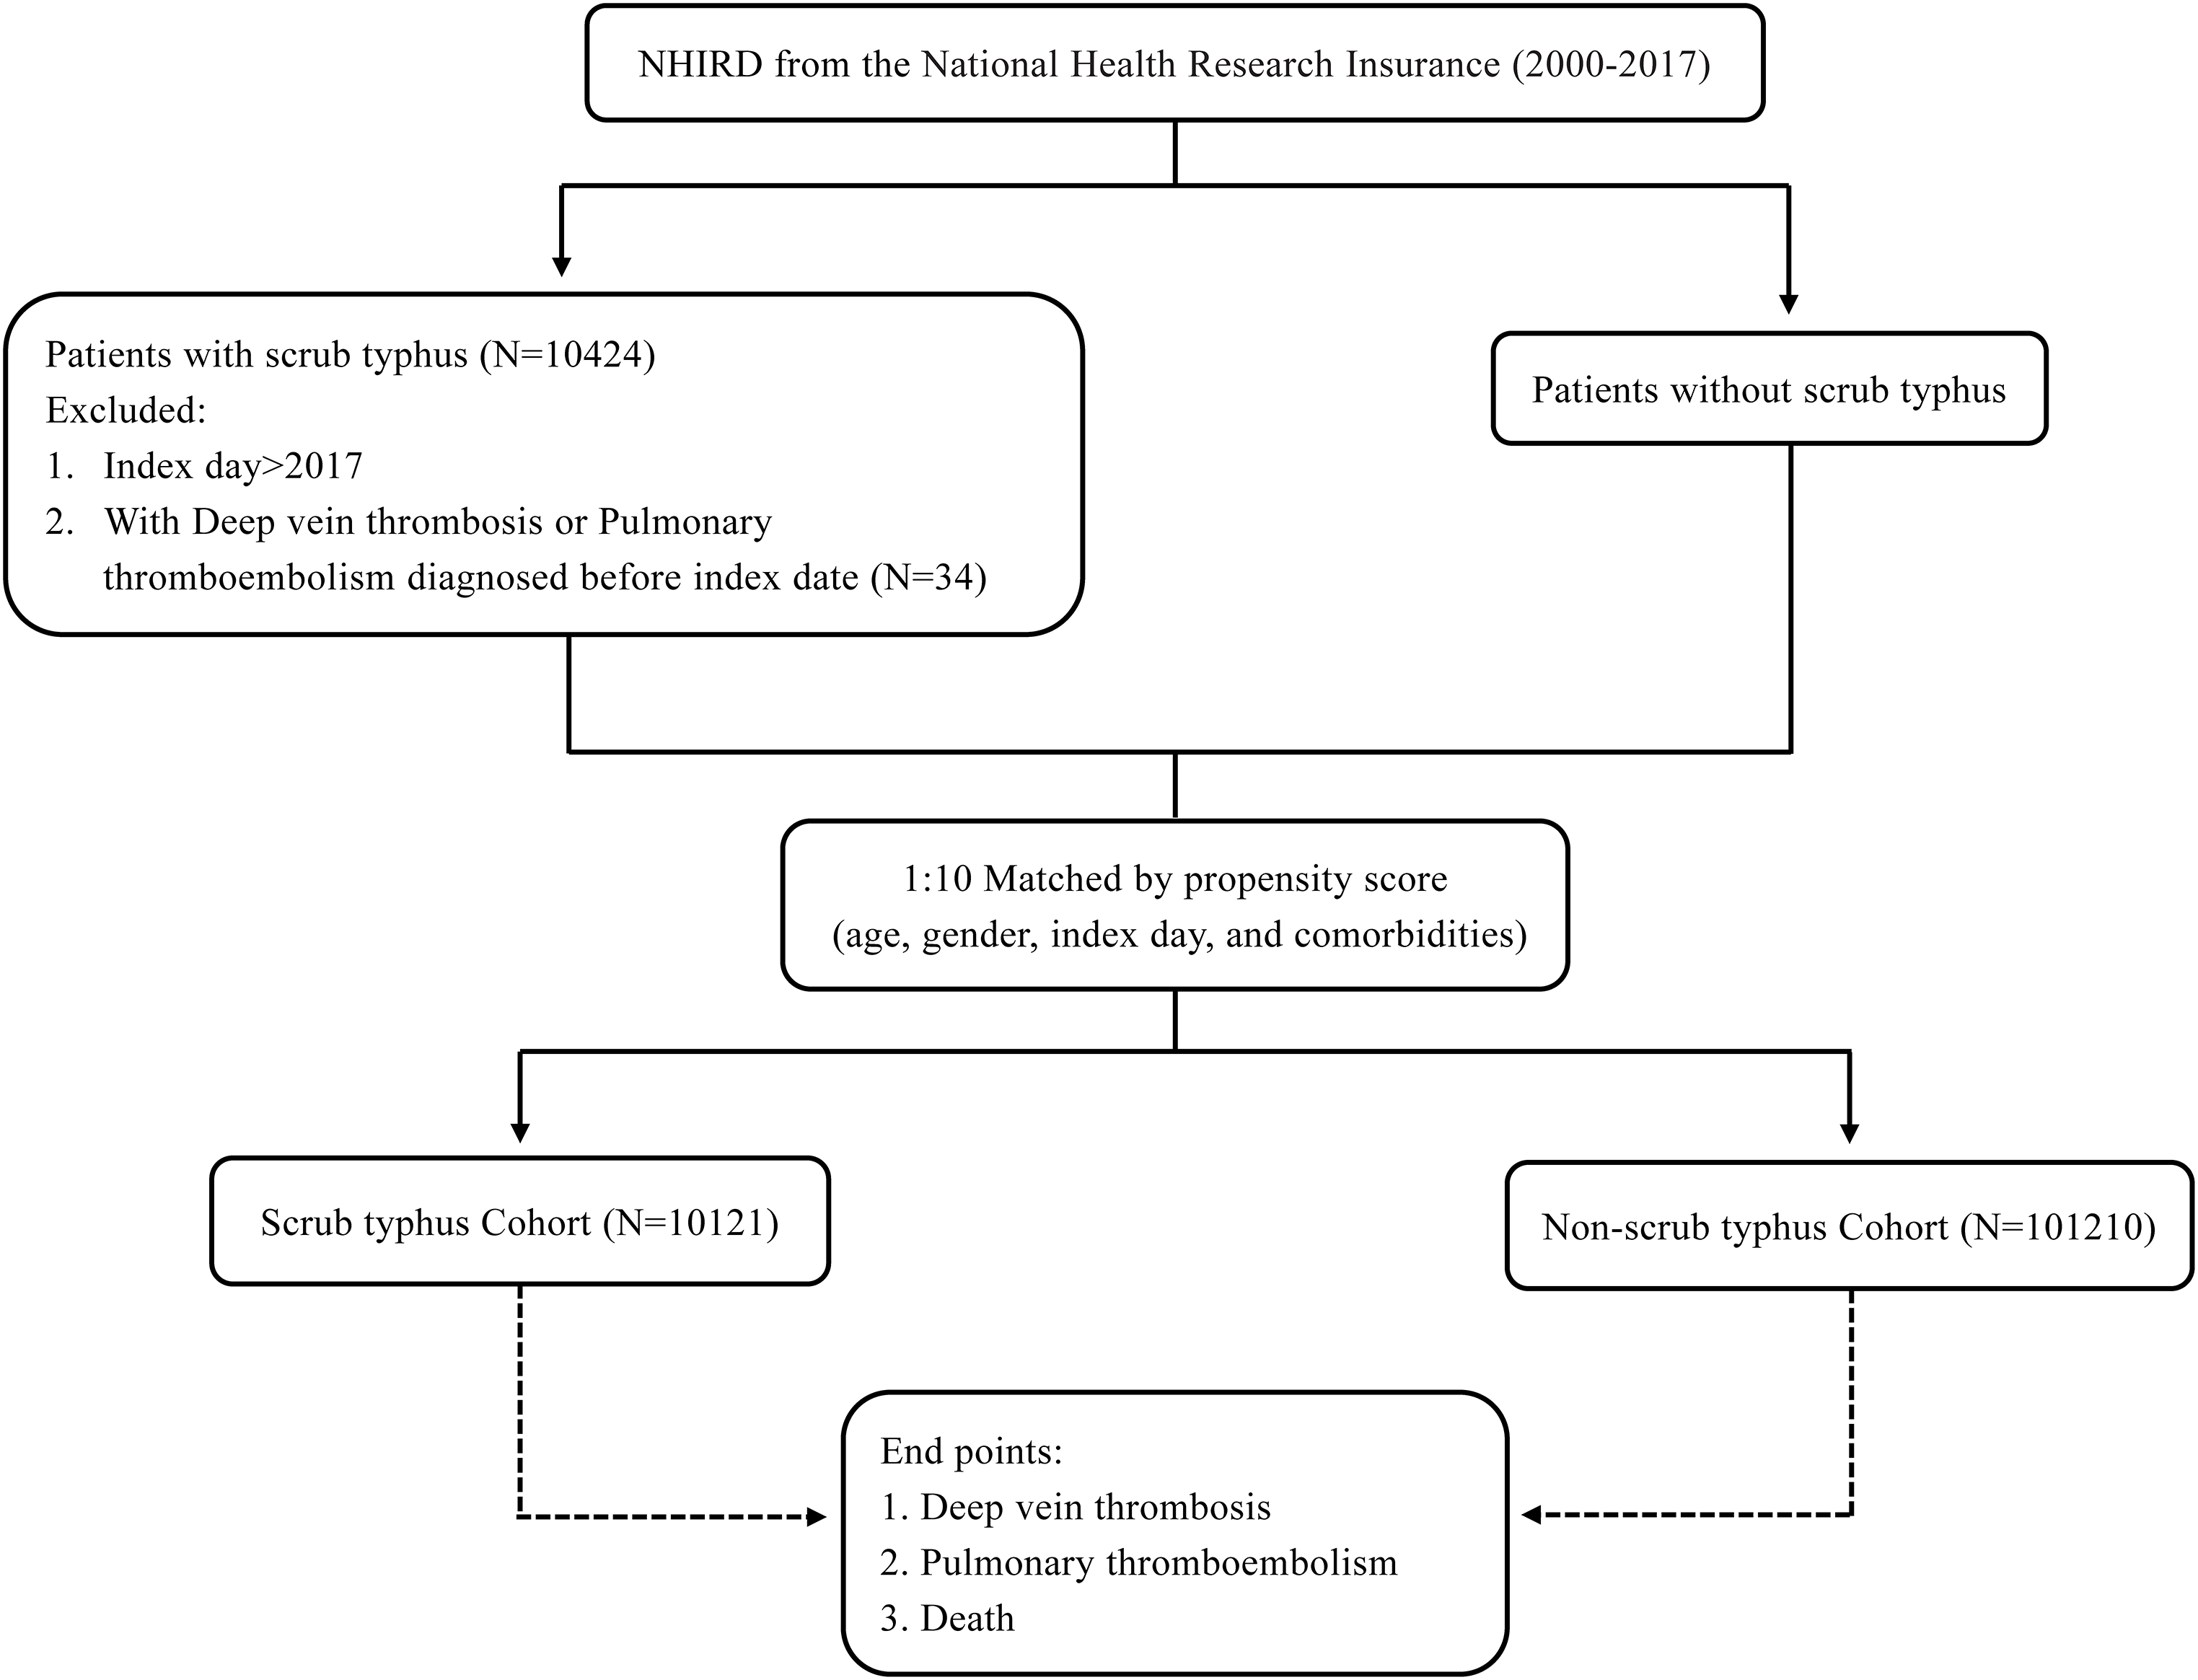 Association of scrub typhus with the risk of venous thromboembolism and long-term mortality: a population-based cohort study